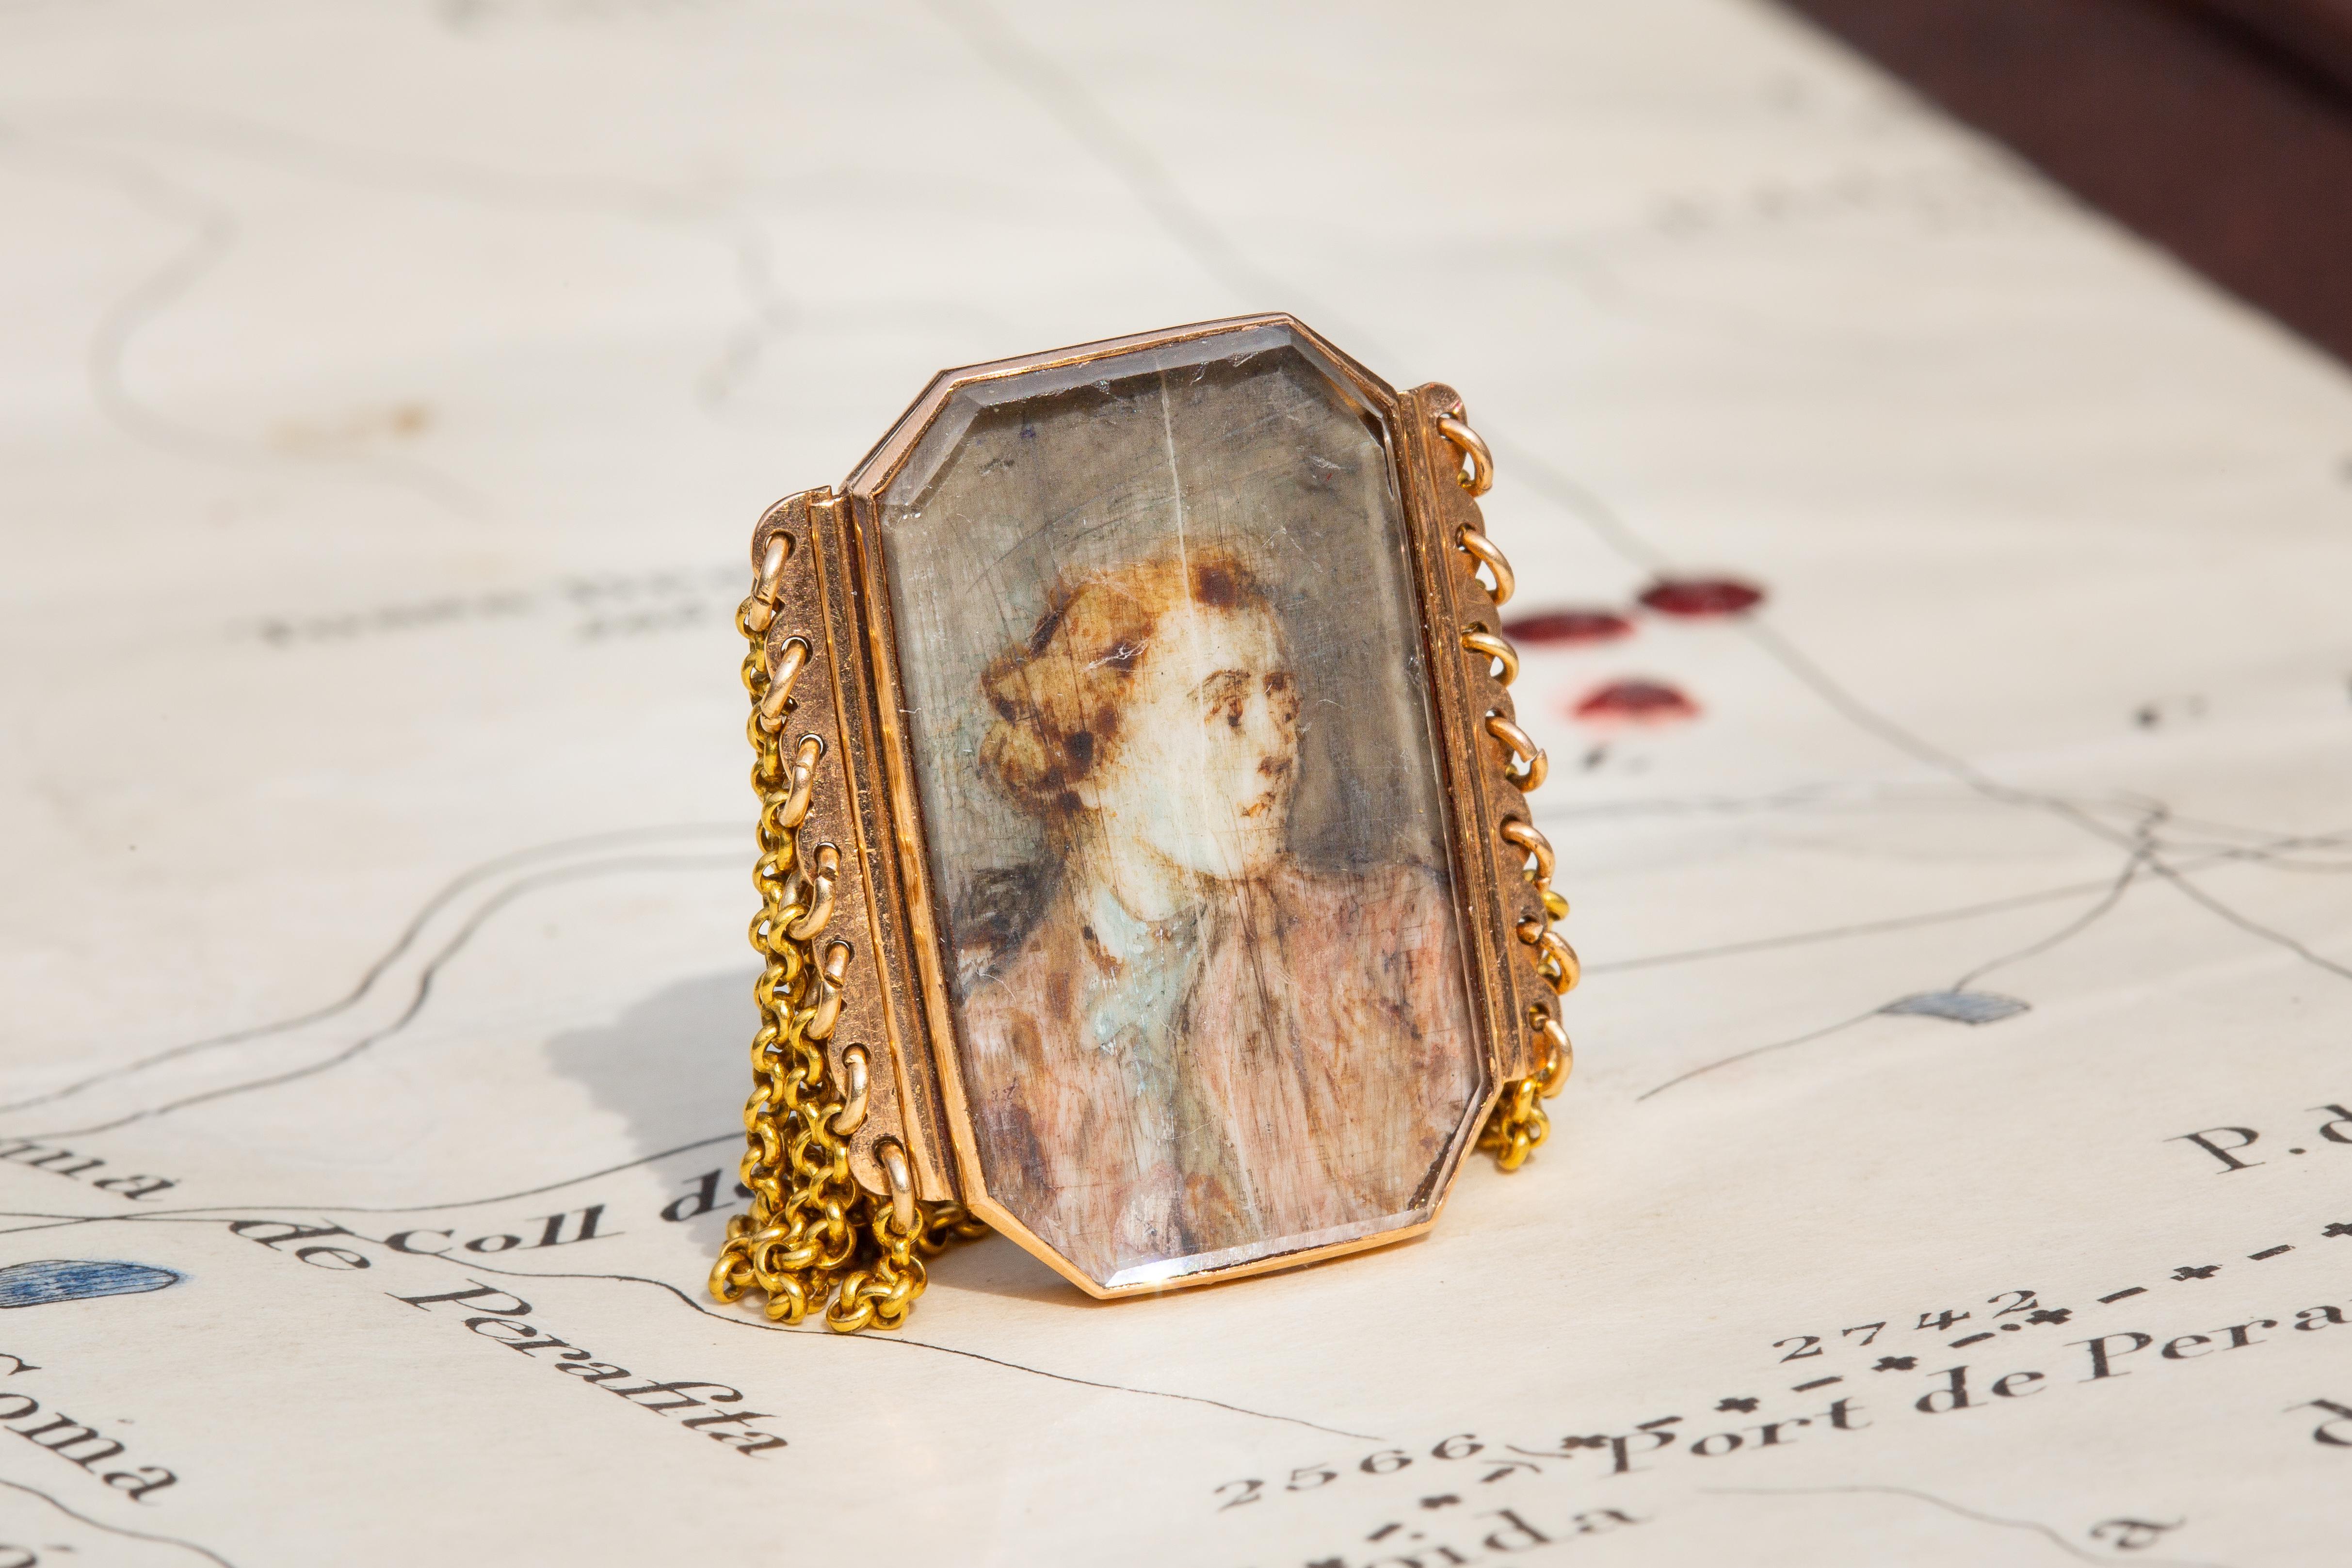 This highly unusual antique gold ring features a late 18th century French portrait miniature attached to a multi-strand belcher-link chain. 

Portrait miniature rings were, for the most part, of a sentimental nature; commissioned and worn by loved